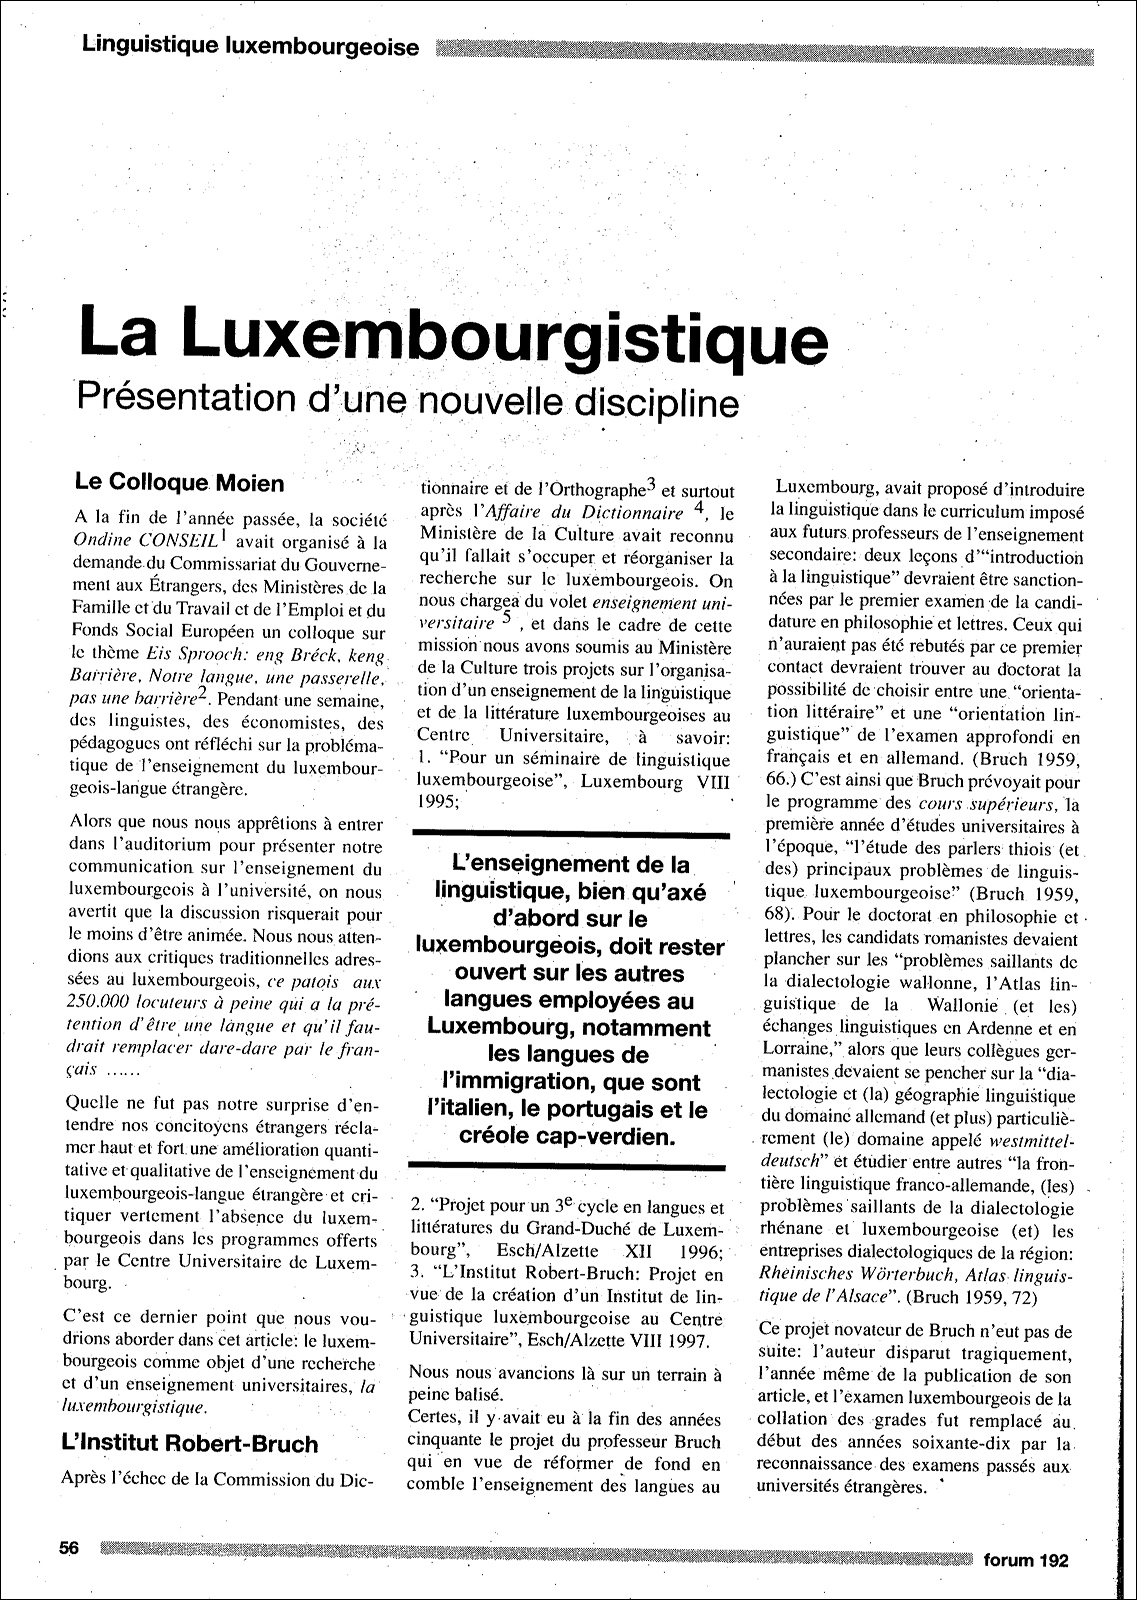 luxembourgistique_1999_1.jpg